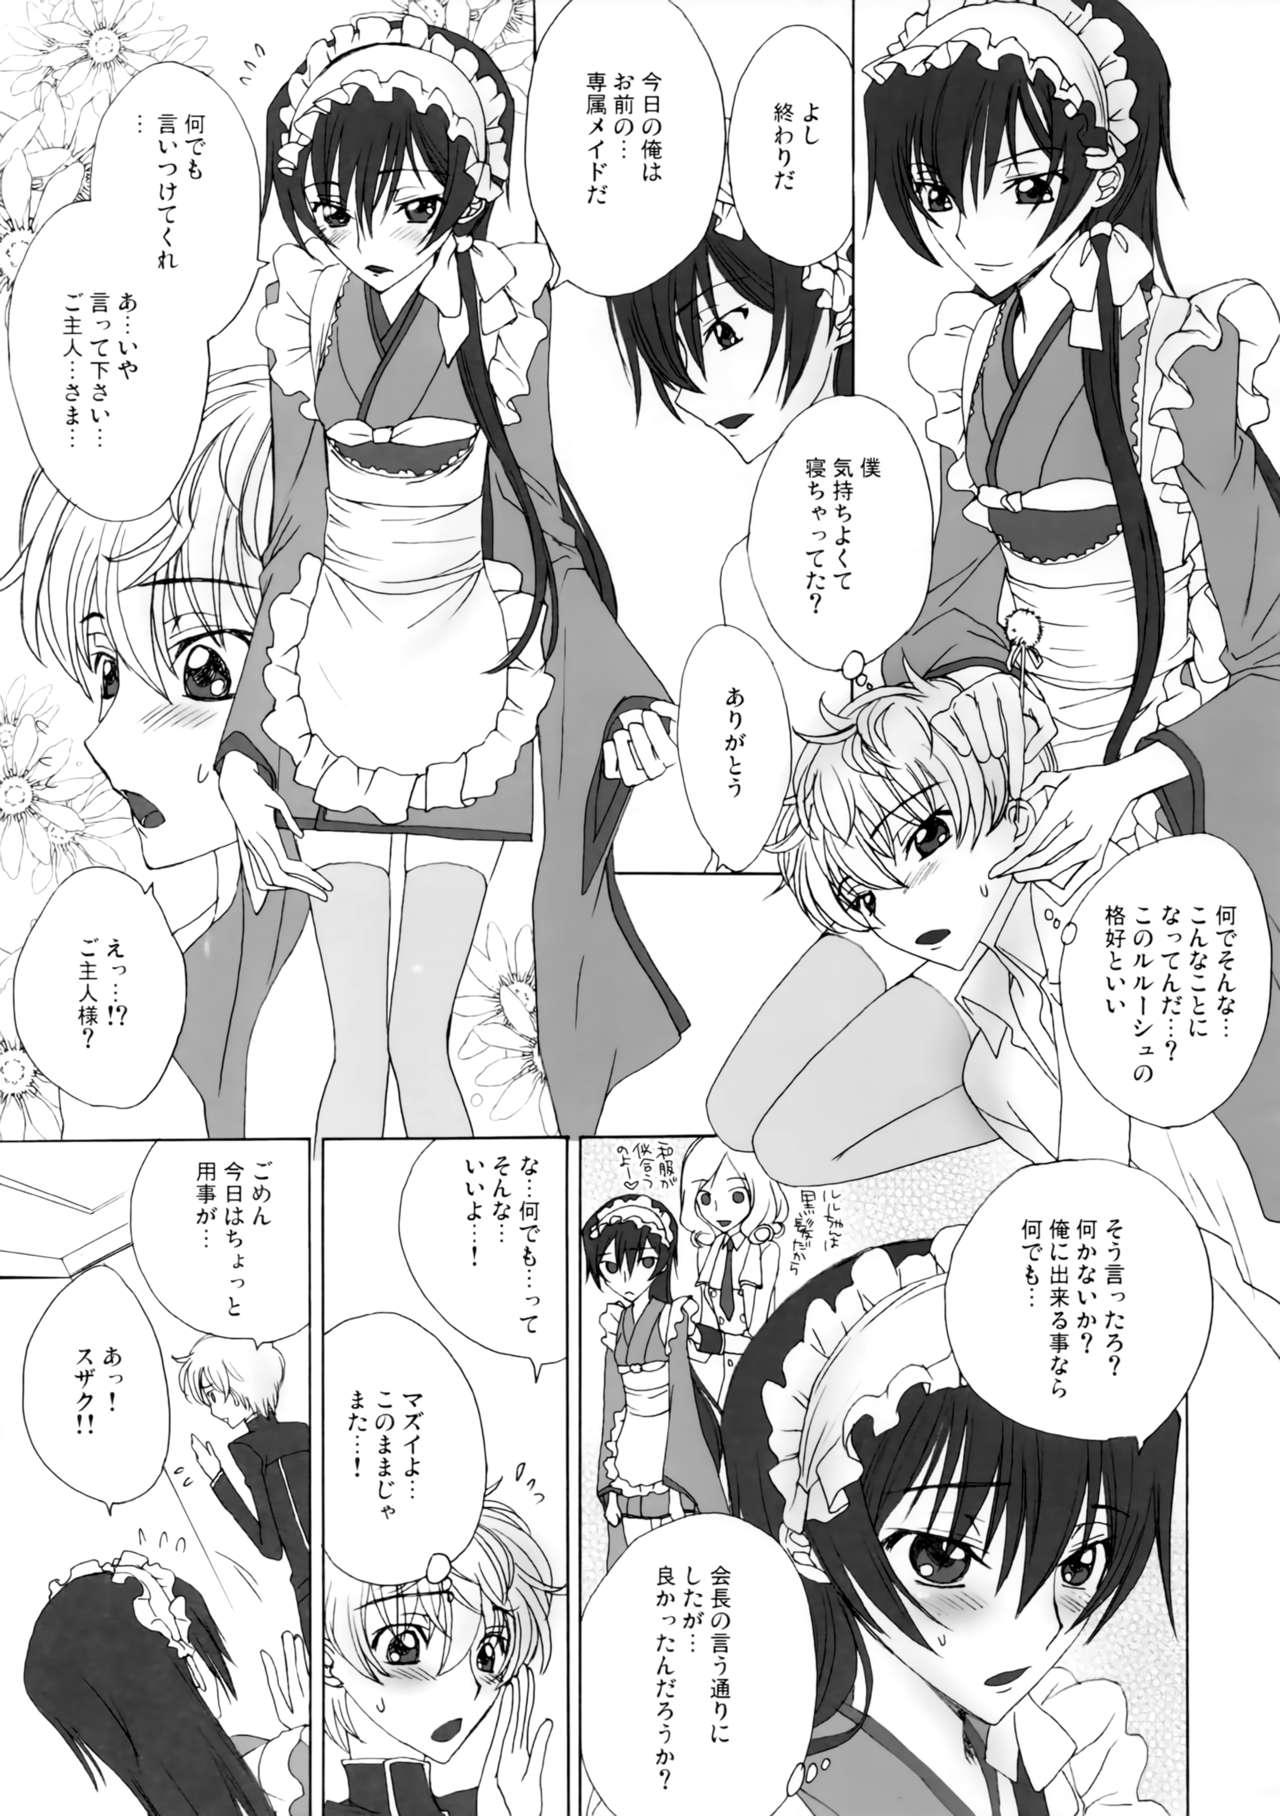 Load Zettai Otome Evolution! - Code geass Pussyeating - Page 8